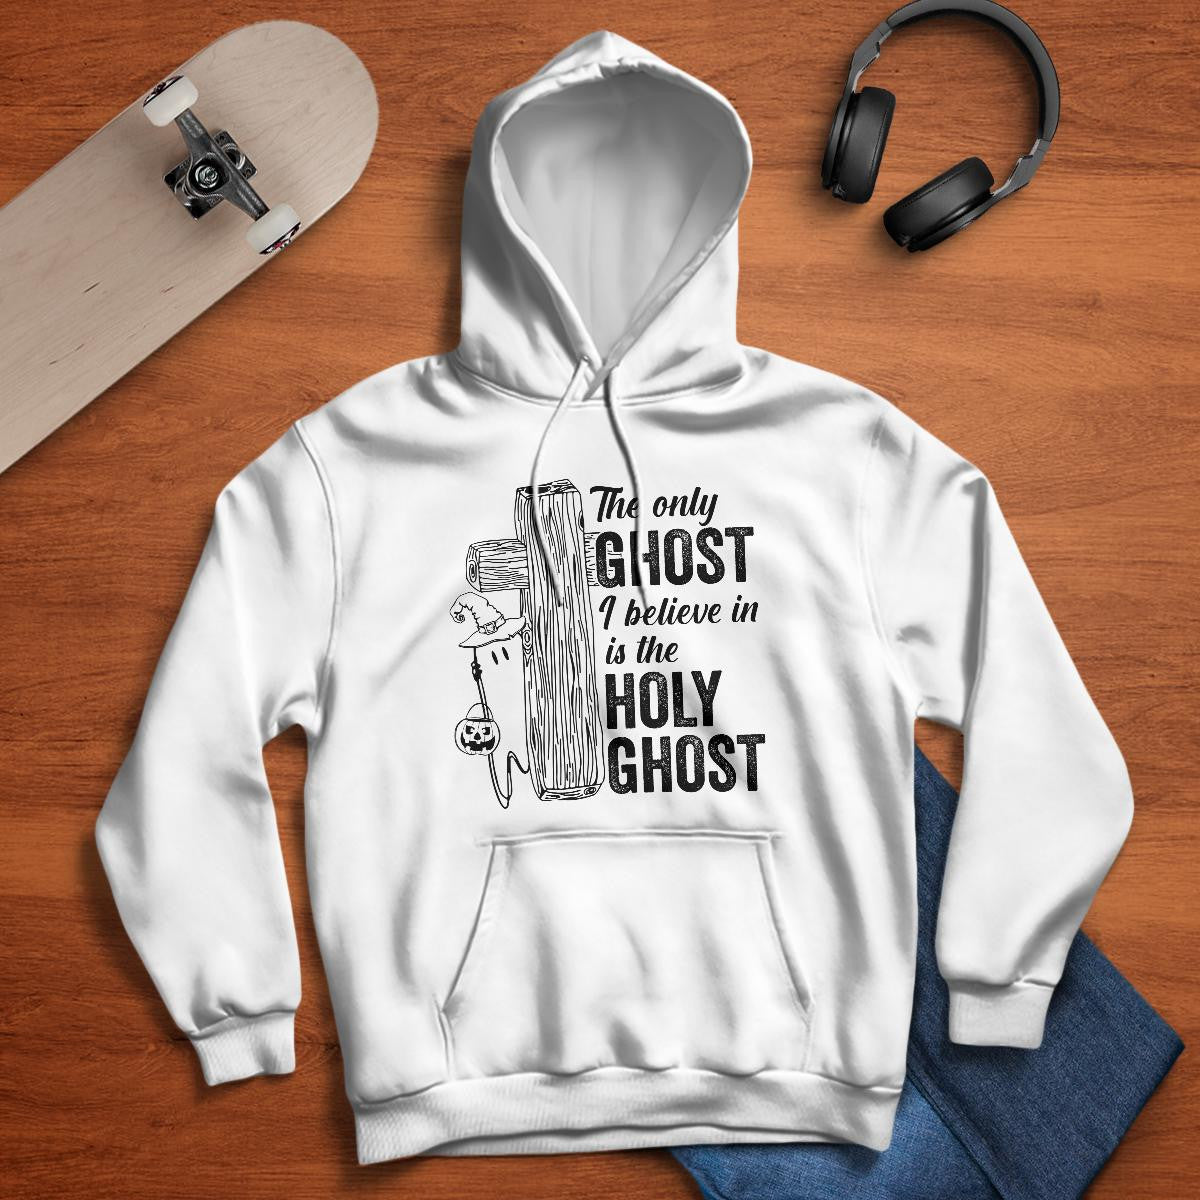 The Only Ghost I Believe In Is The Holy Ghost, Halloween T-Shirt